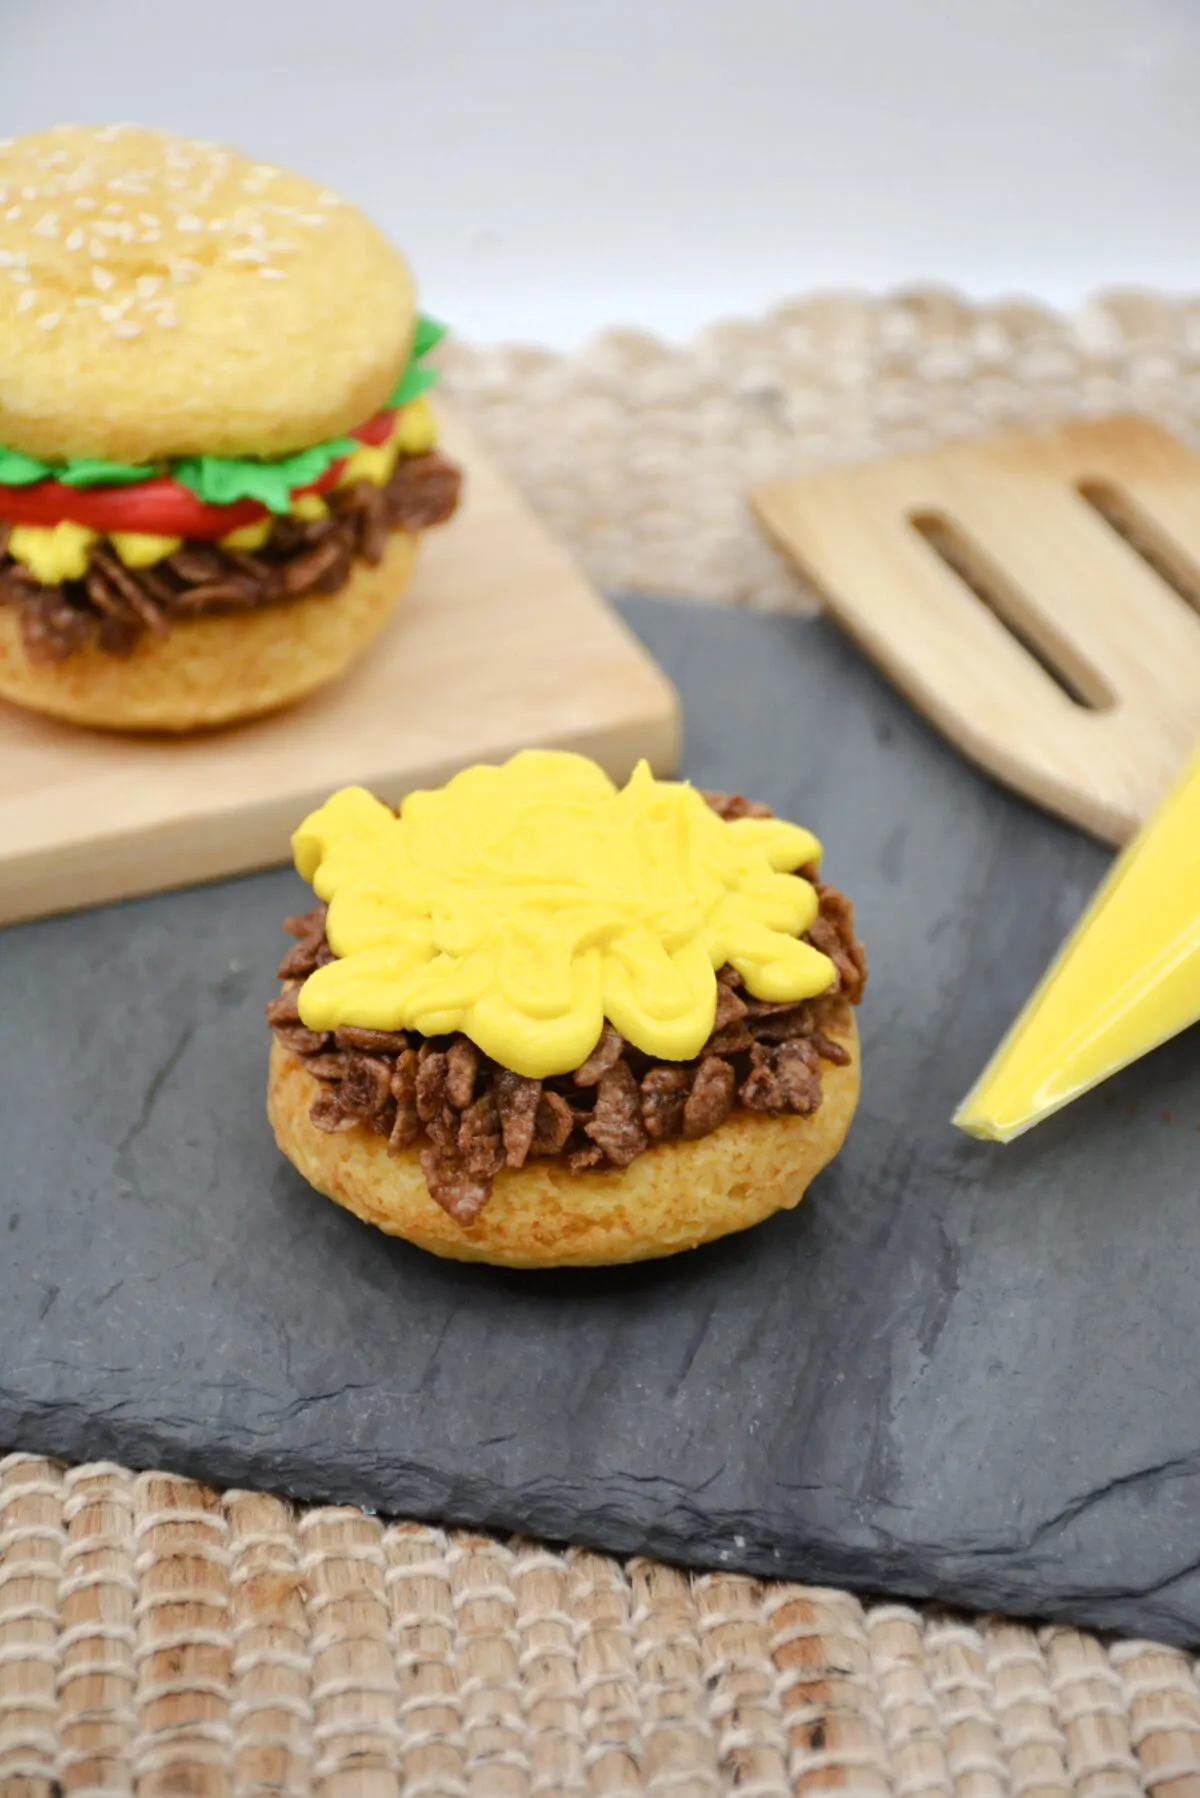 Using yellow frosting to create "mustard".